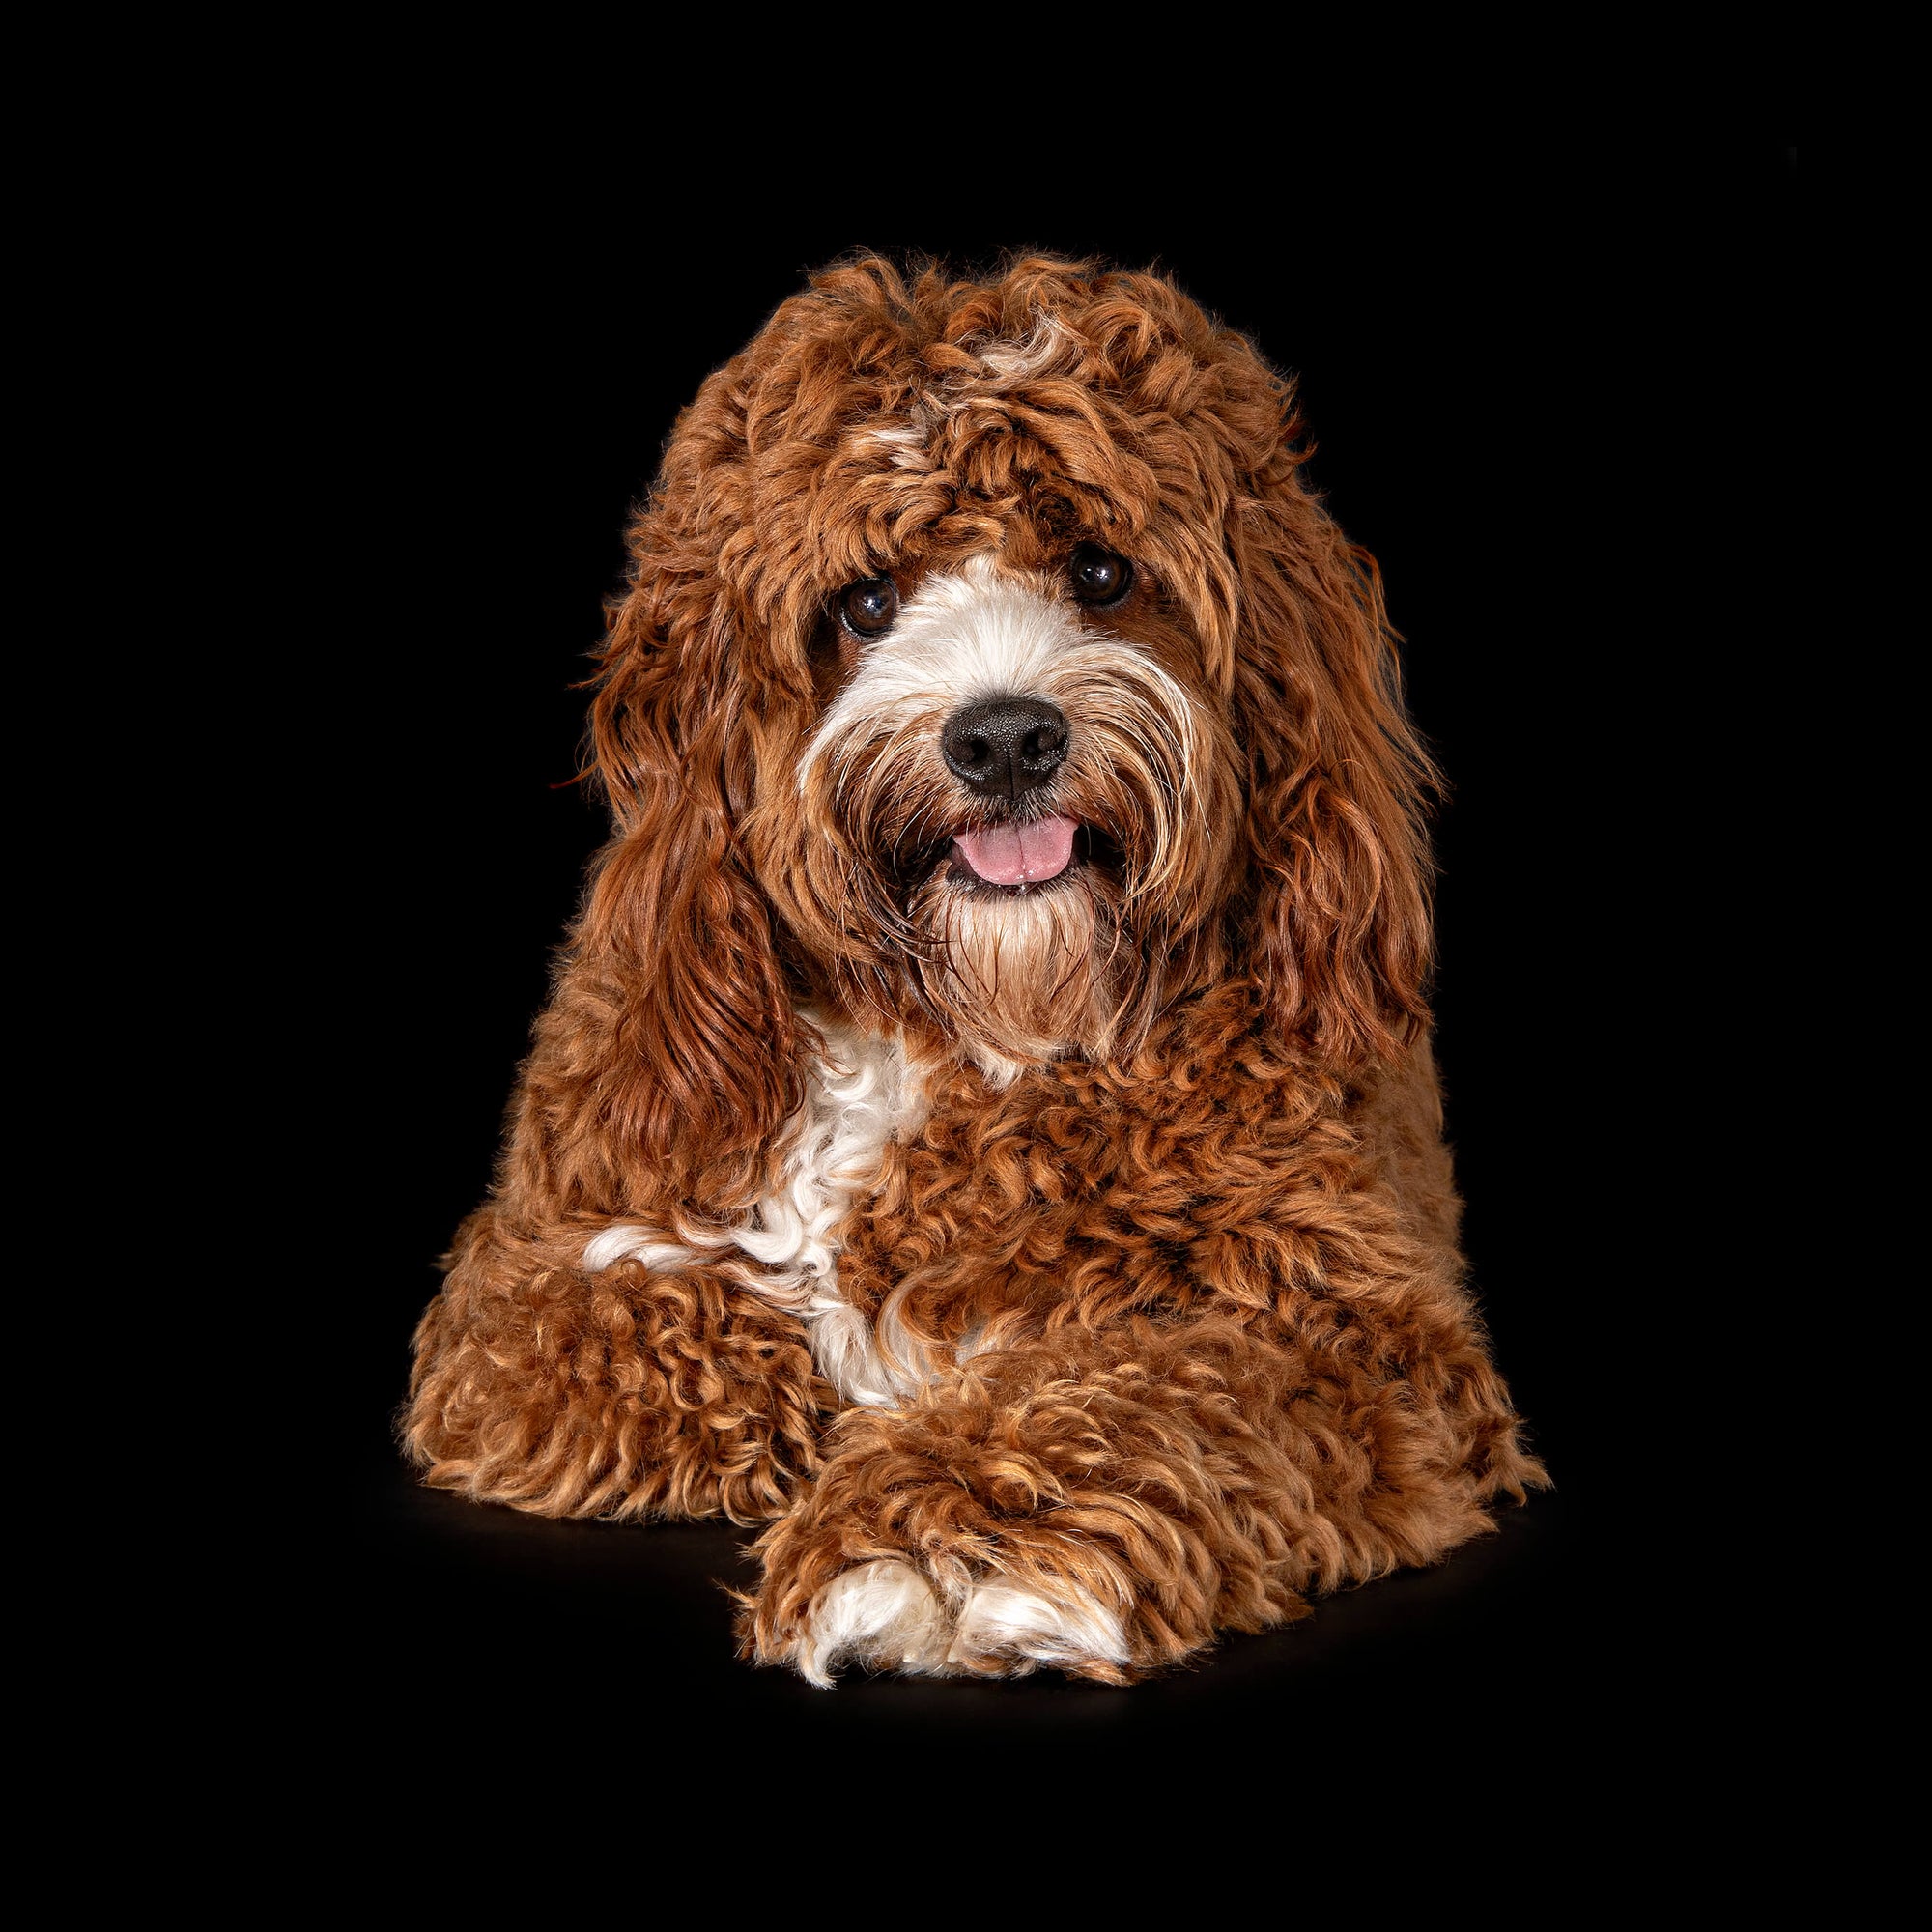 Fluffy, the Cavoodle